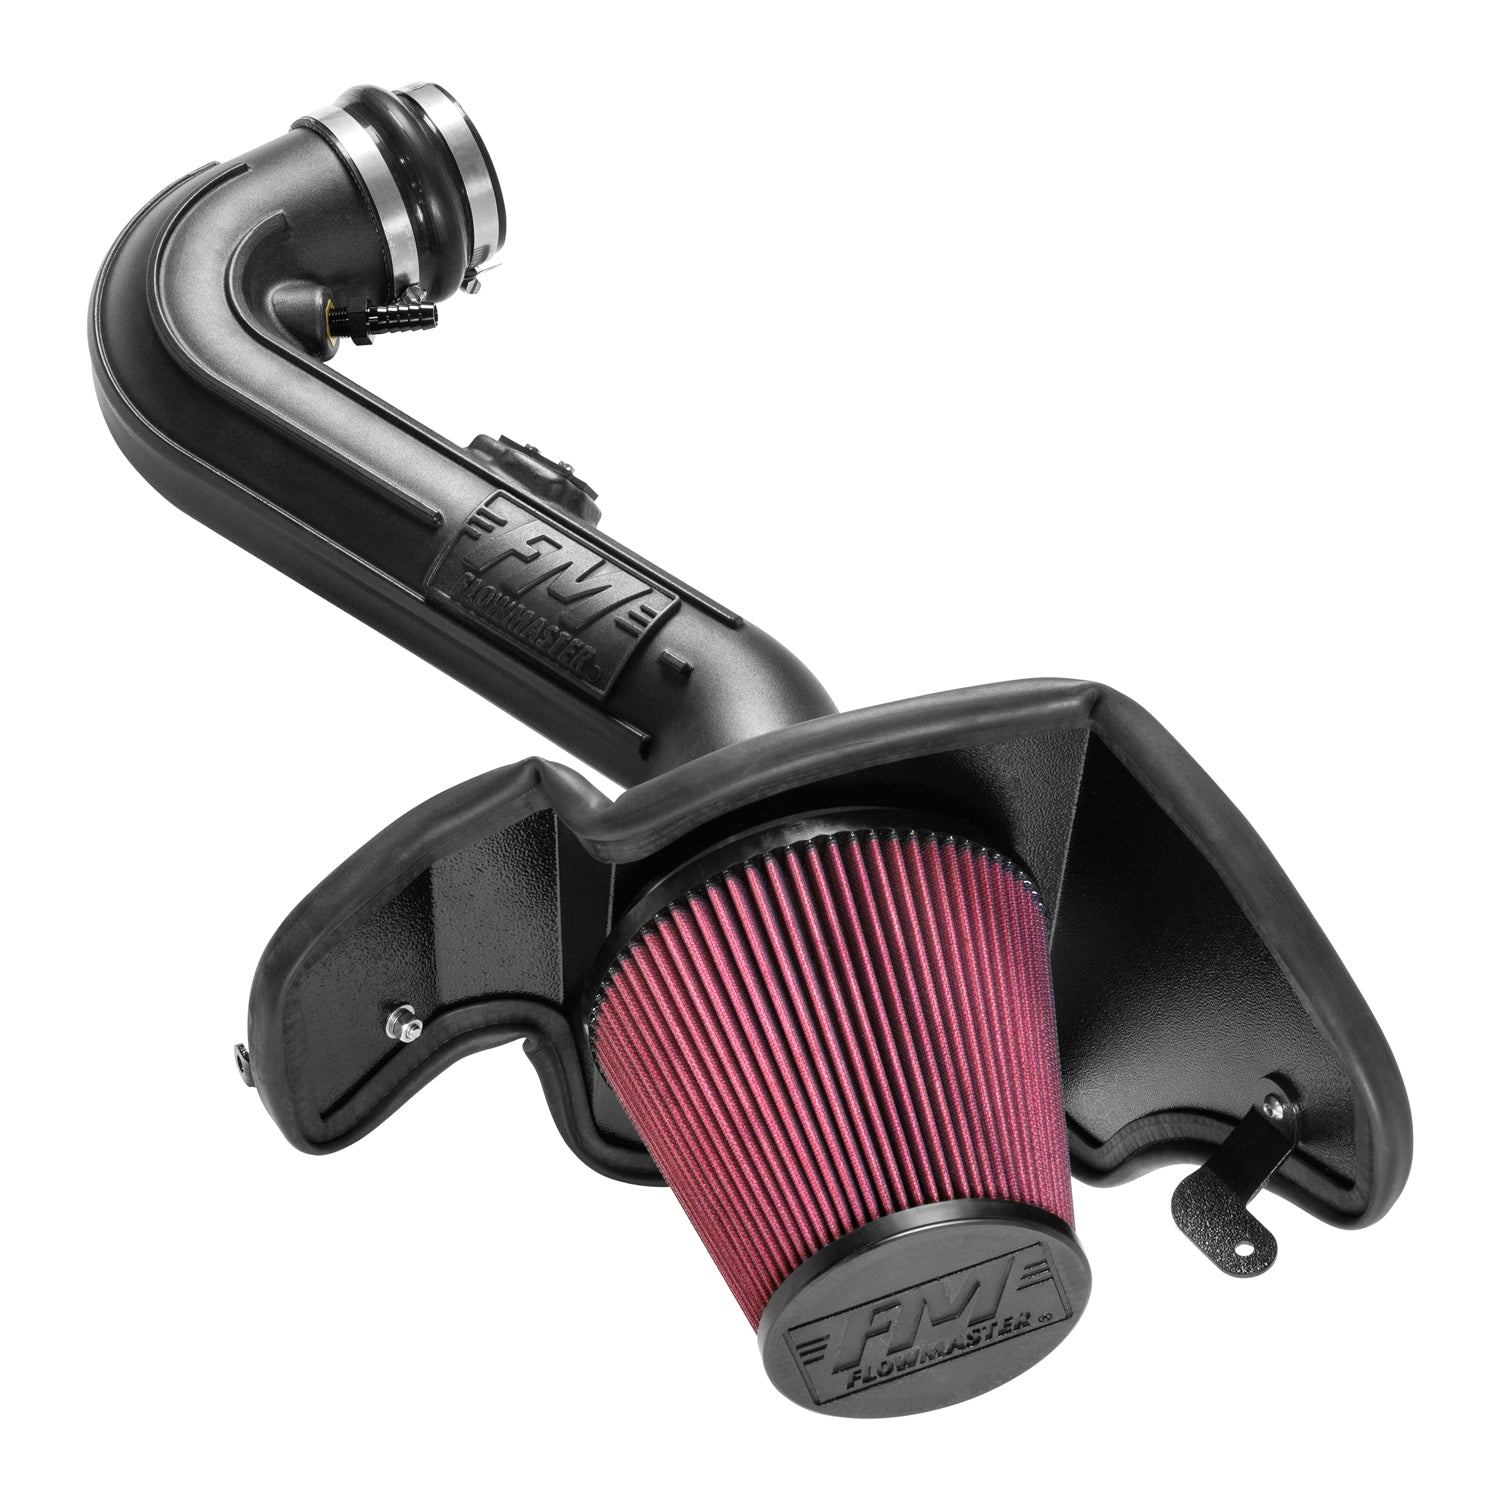 Flowmaster Performance Air Intake - Delta Force - 05-09 Mustang 4.0L 615172